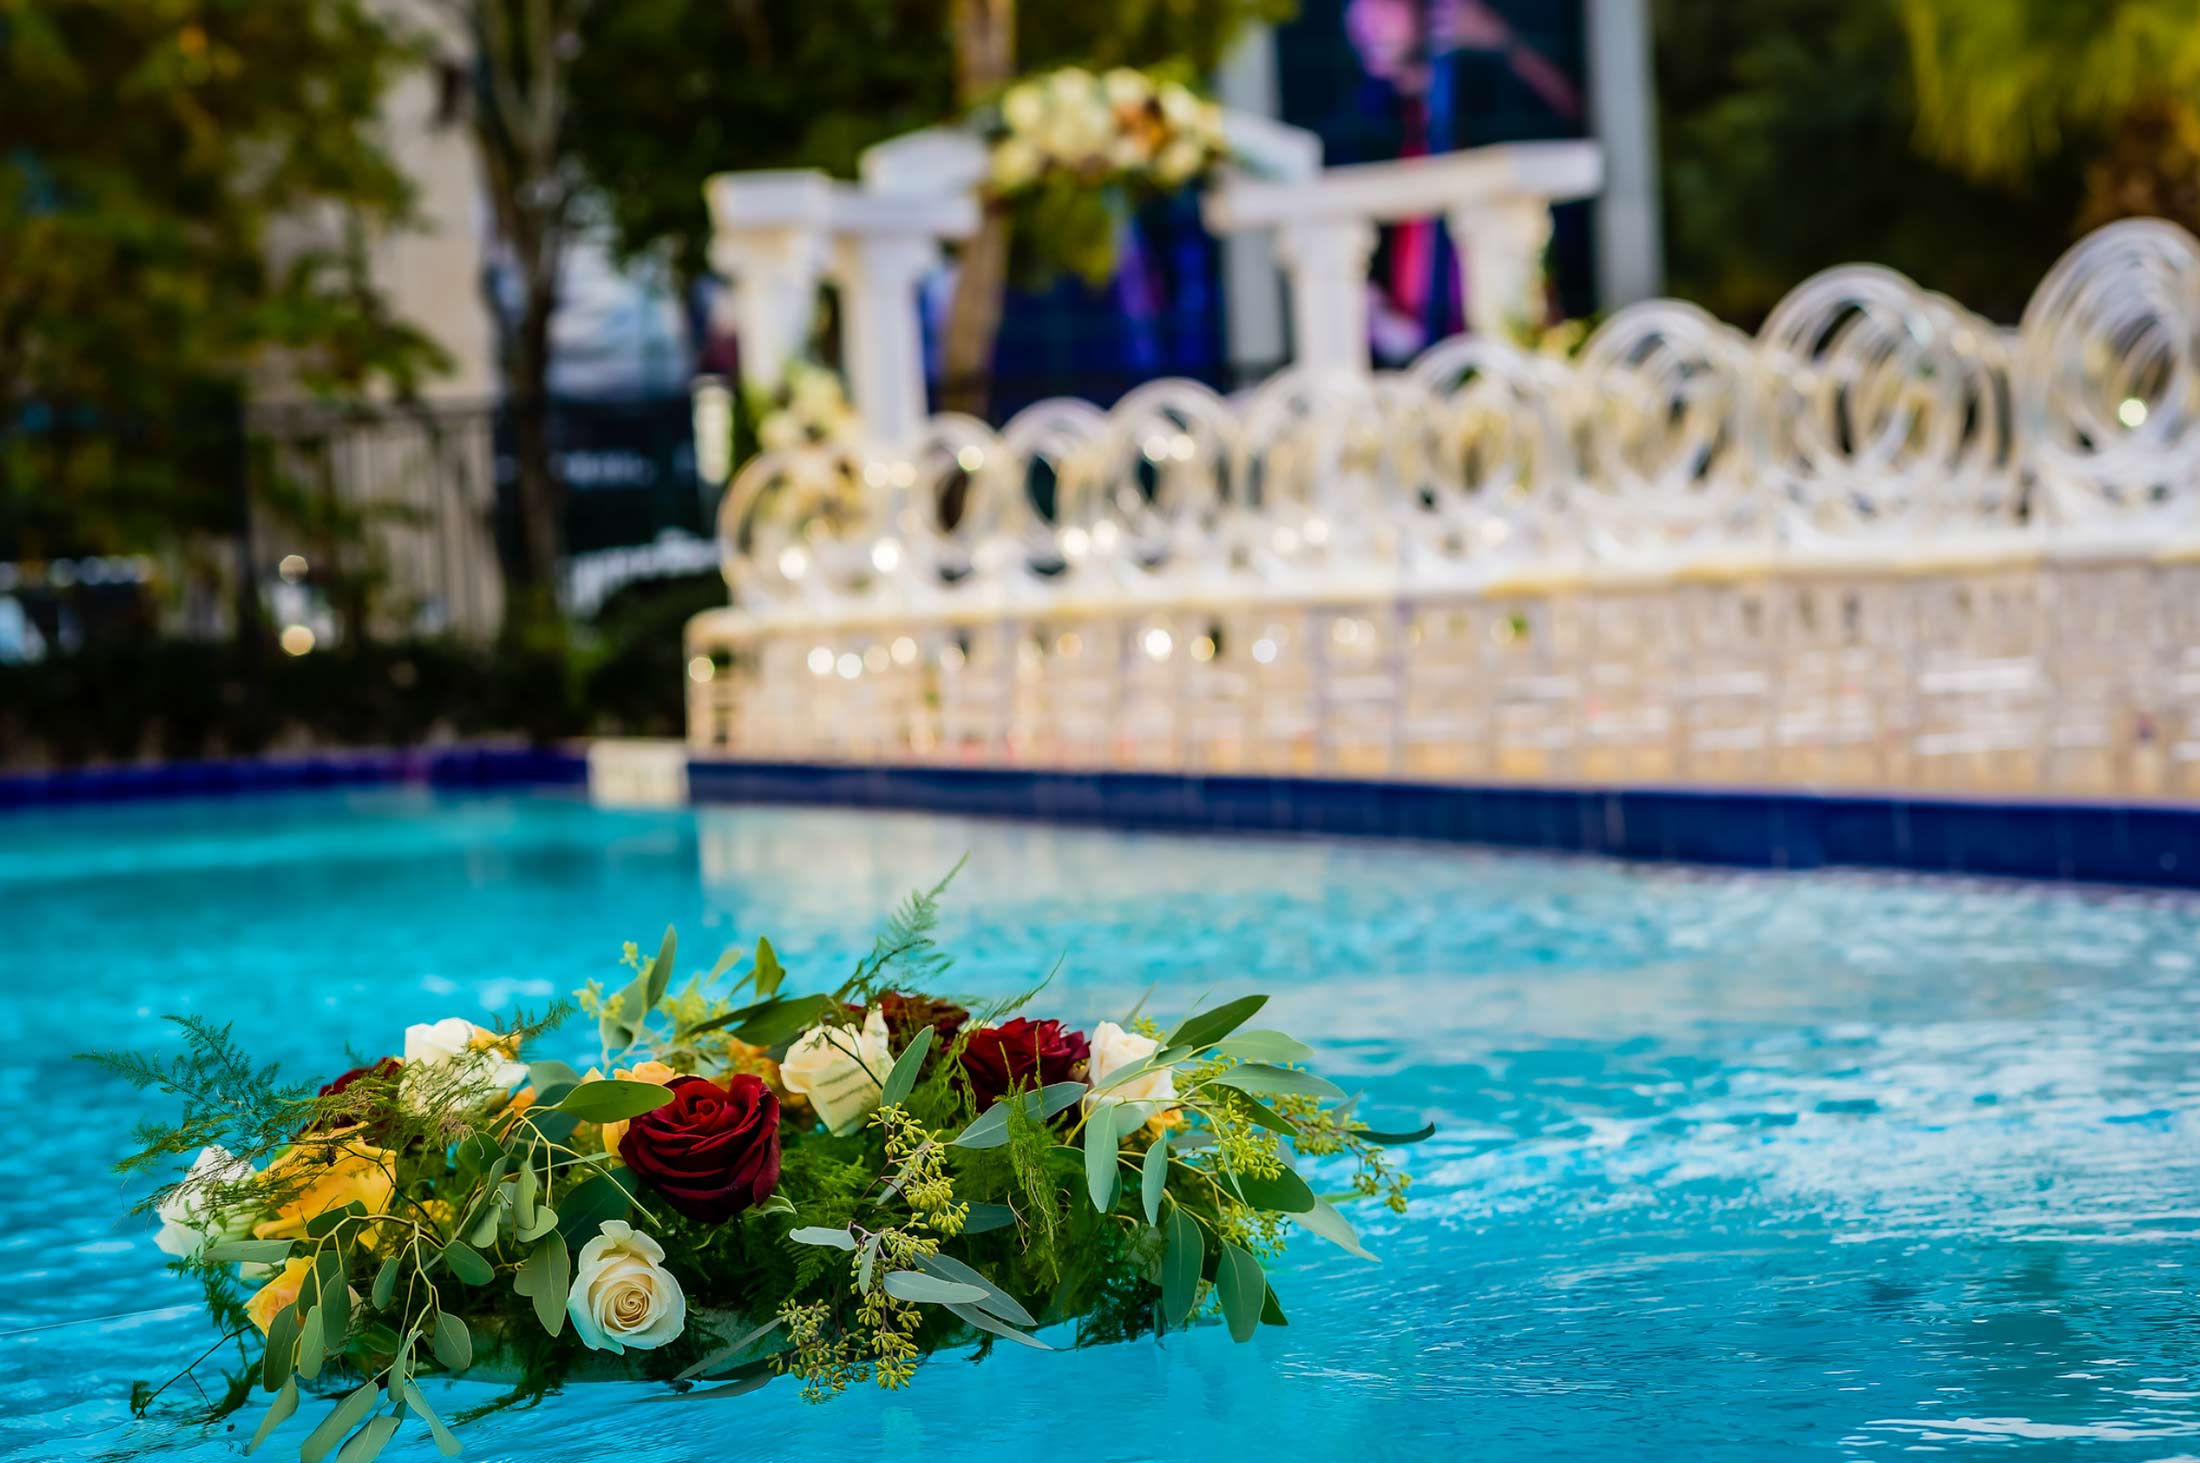 floating flower arrangement in pool with wedding ceremony set up in background